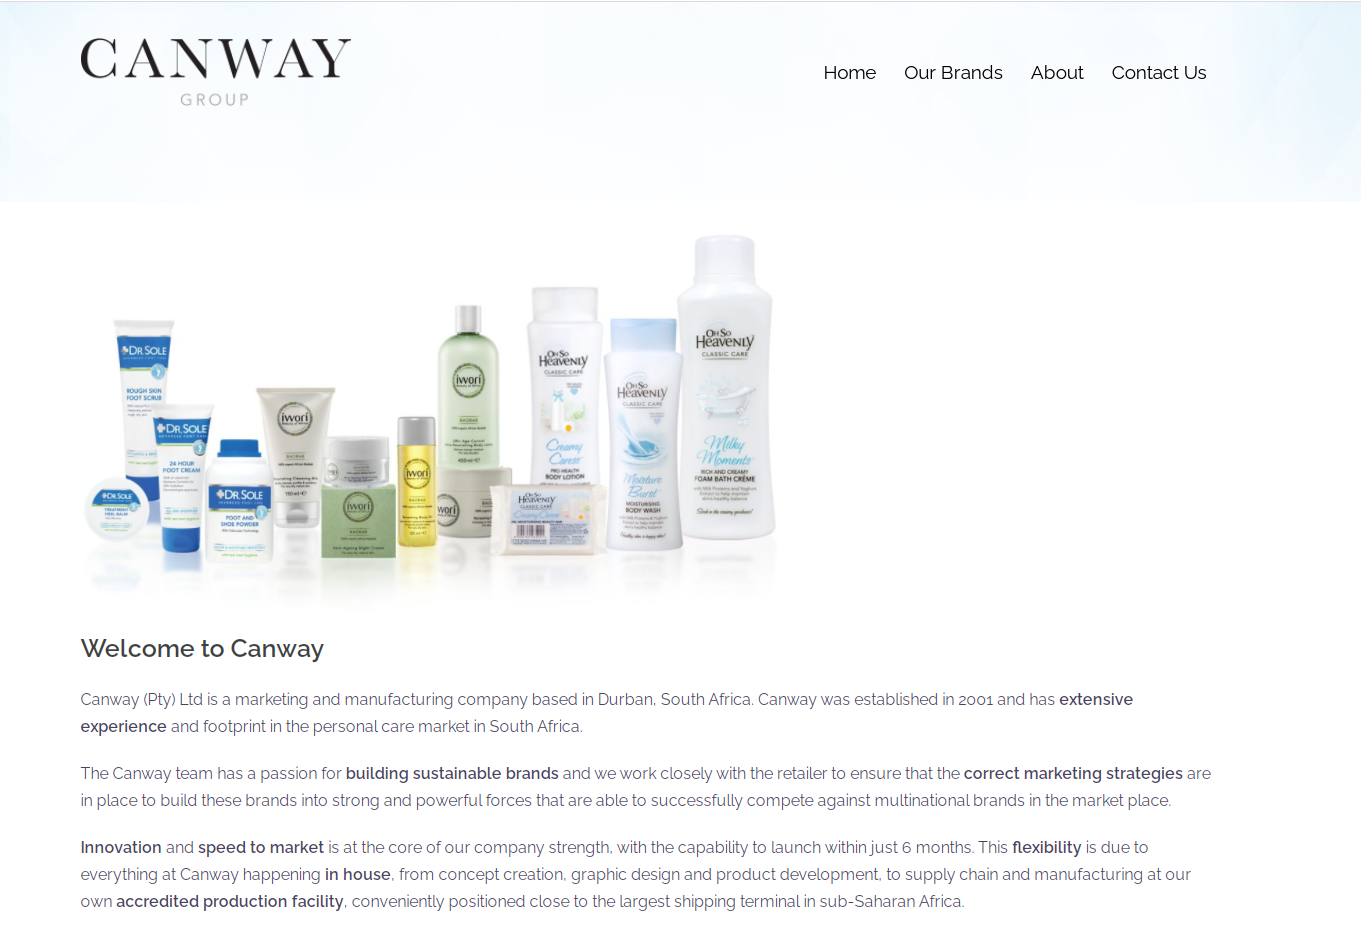 Our cosmetic brand partner - CANWAY